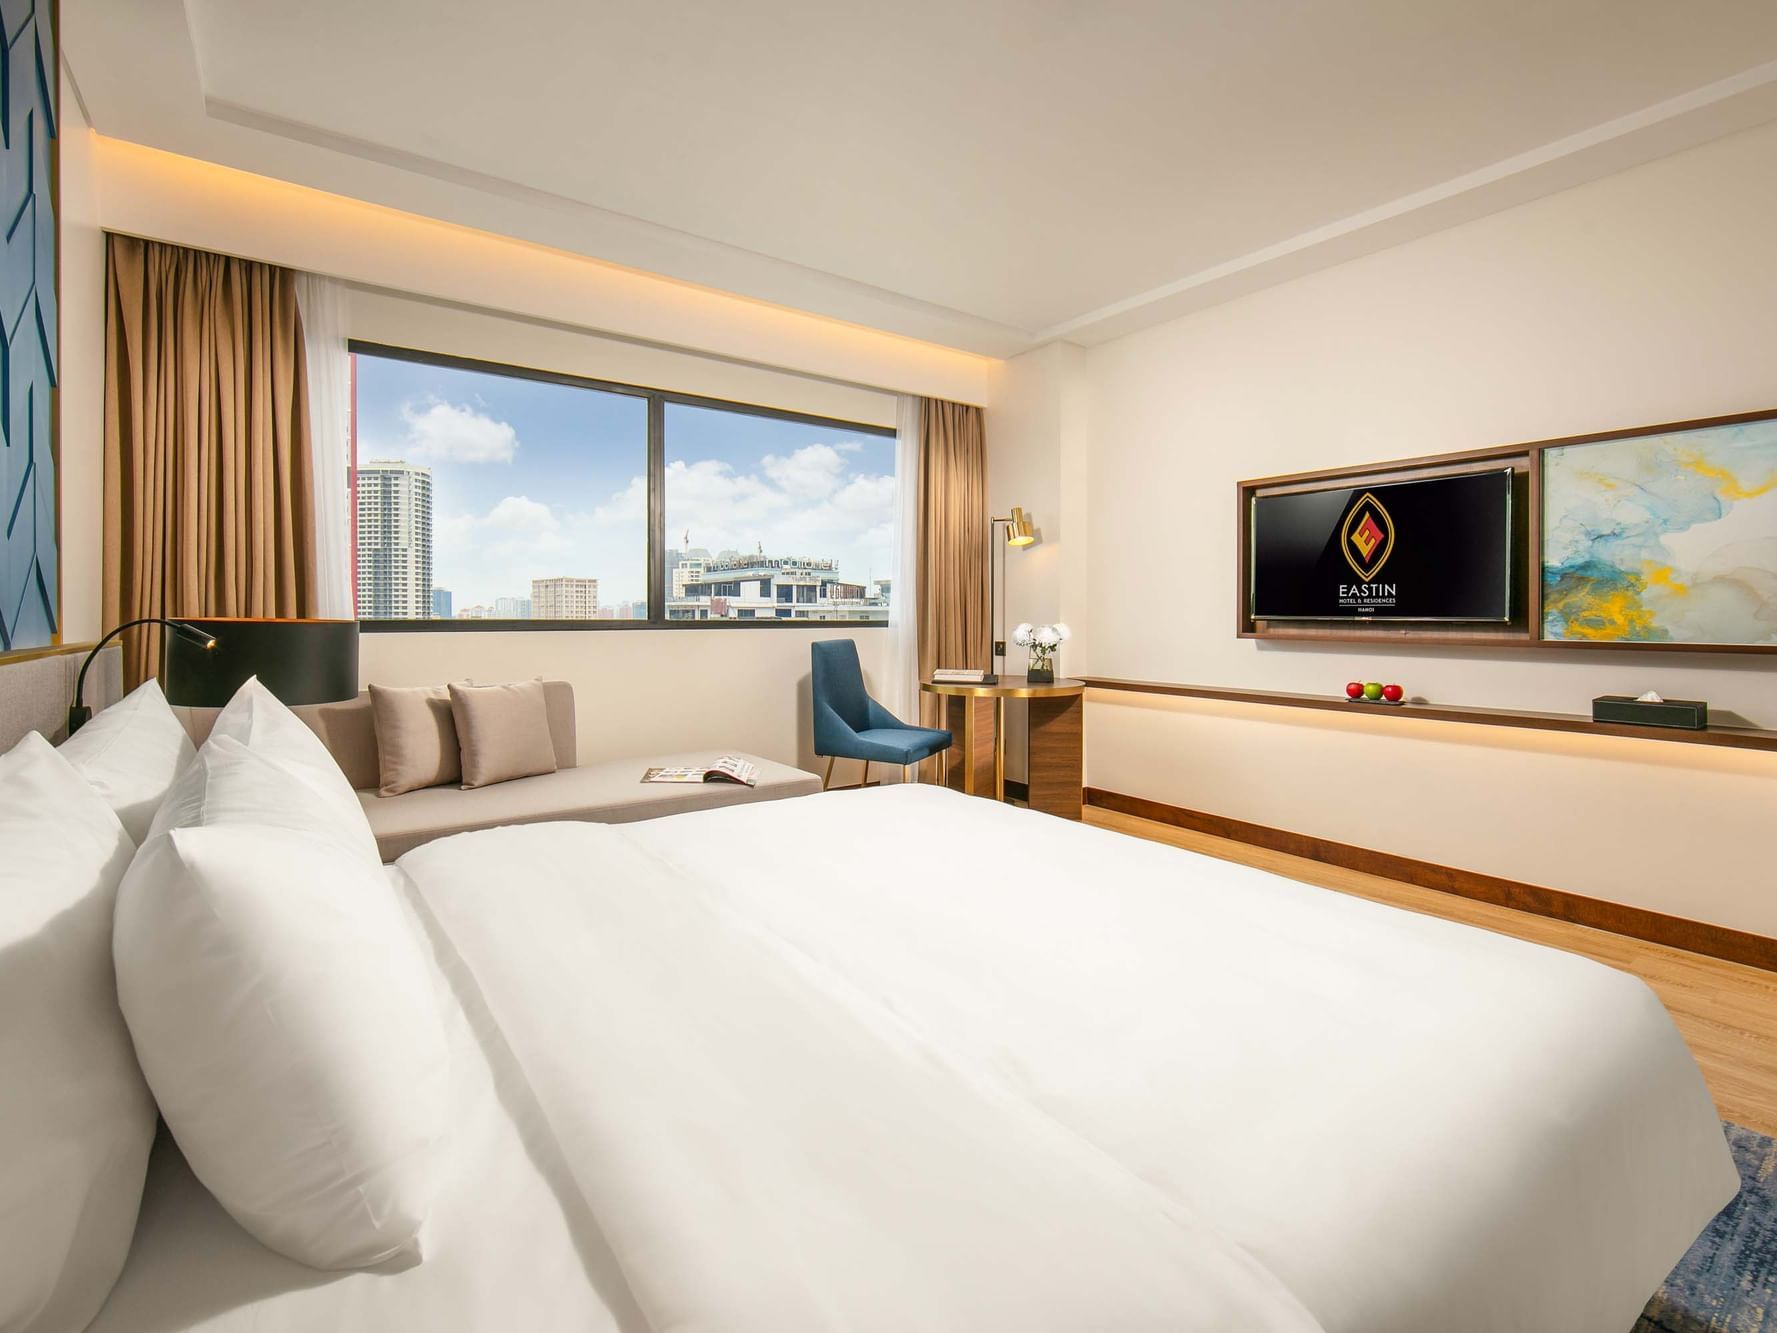 Beds, TV in Executive Corner at Eastin Hotel & Residences Hanoi